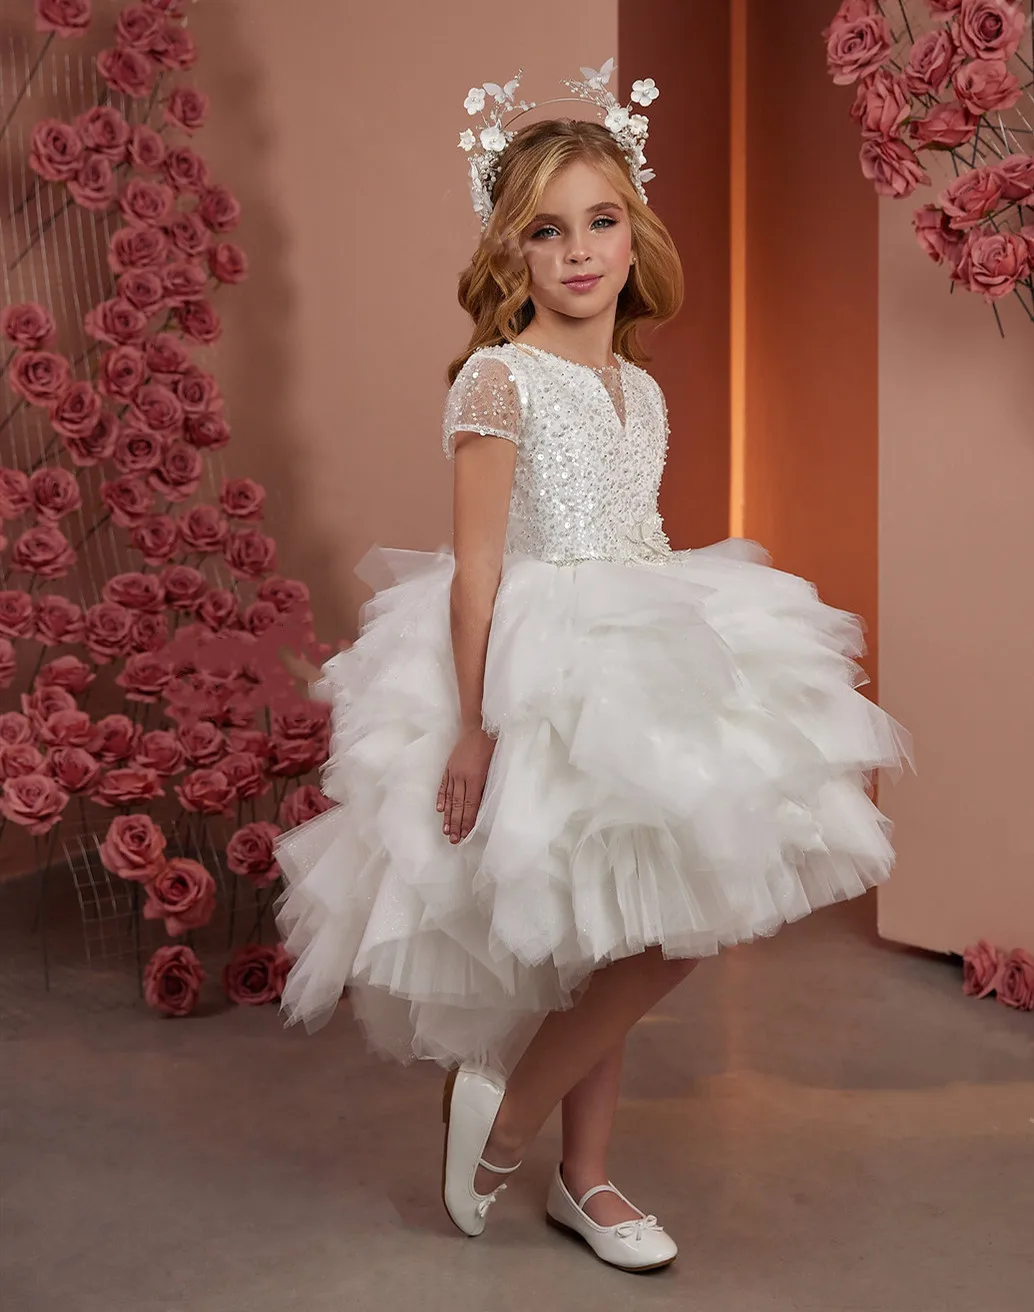 

Ivory Tulle Puffy Flower Girl Dresses For Wedding Glitter Sequined Children Birthday Party Pageant Ball Gowns Layered Dresses